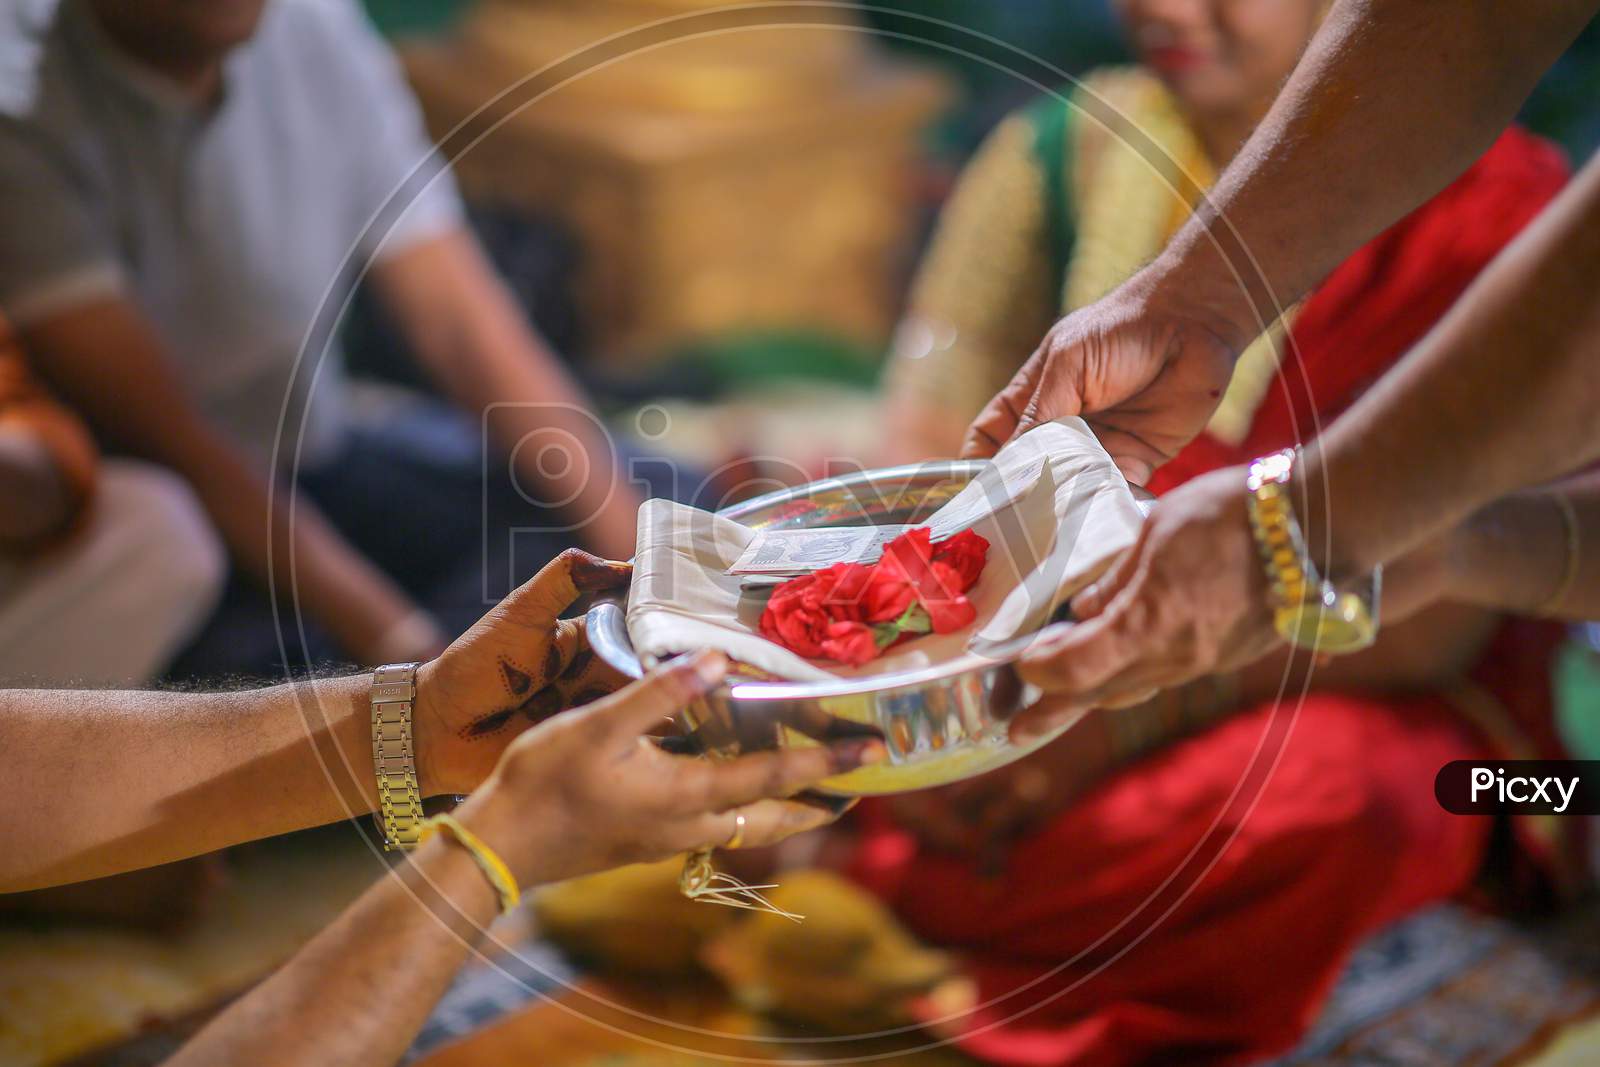 South Indian Wedding Ritual  At Wedding Ceremony